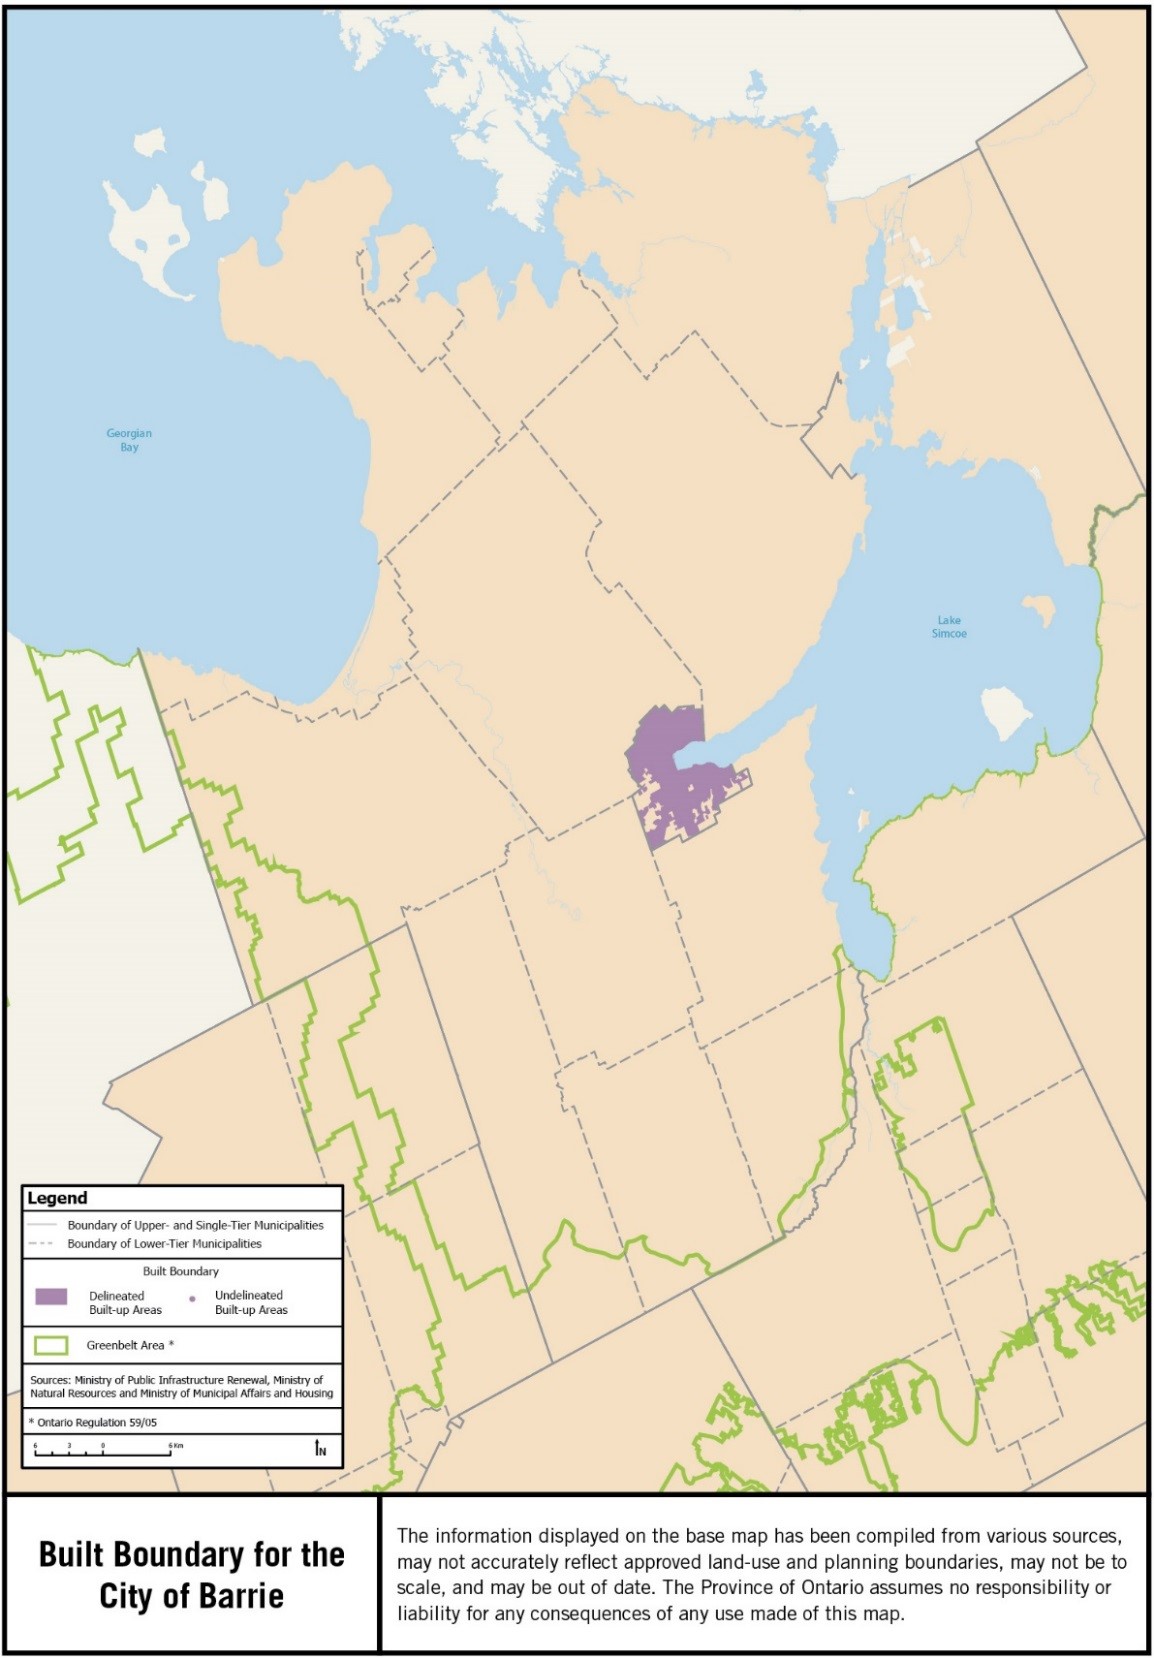 Map showing the built boundary for the City of Barrie.